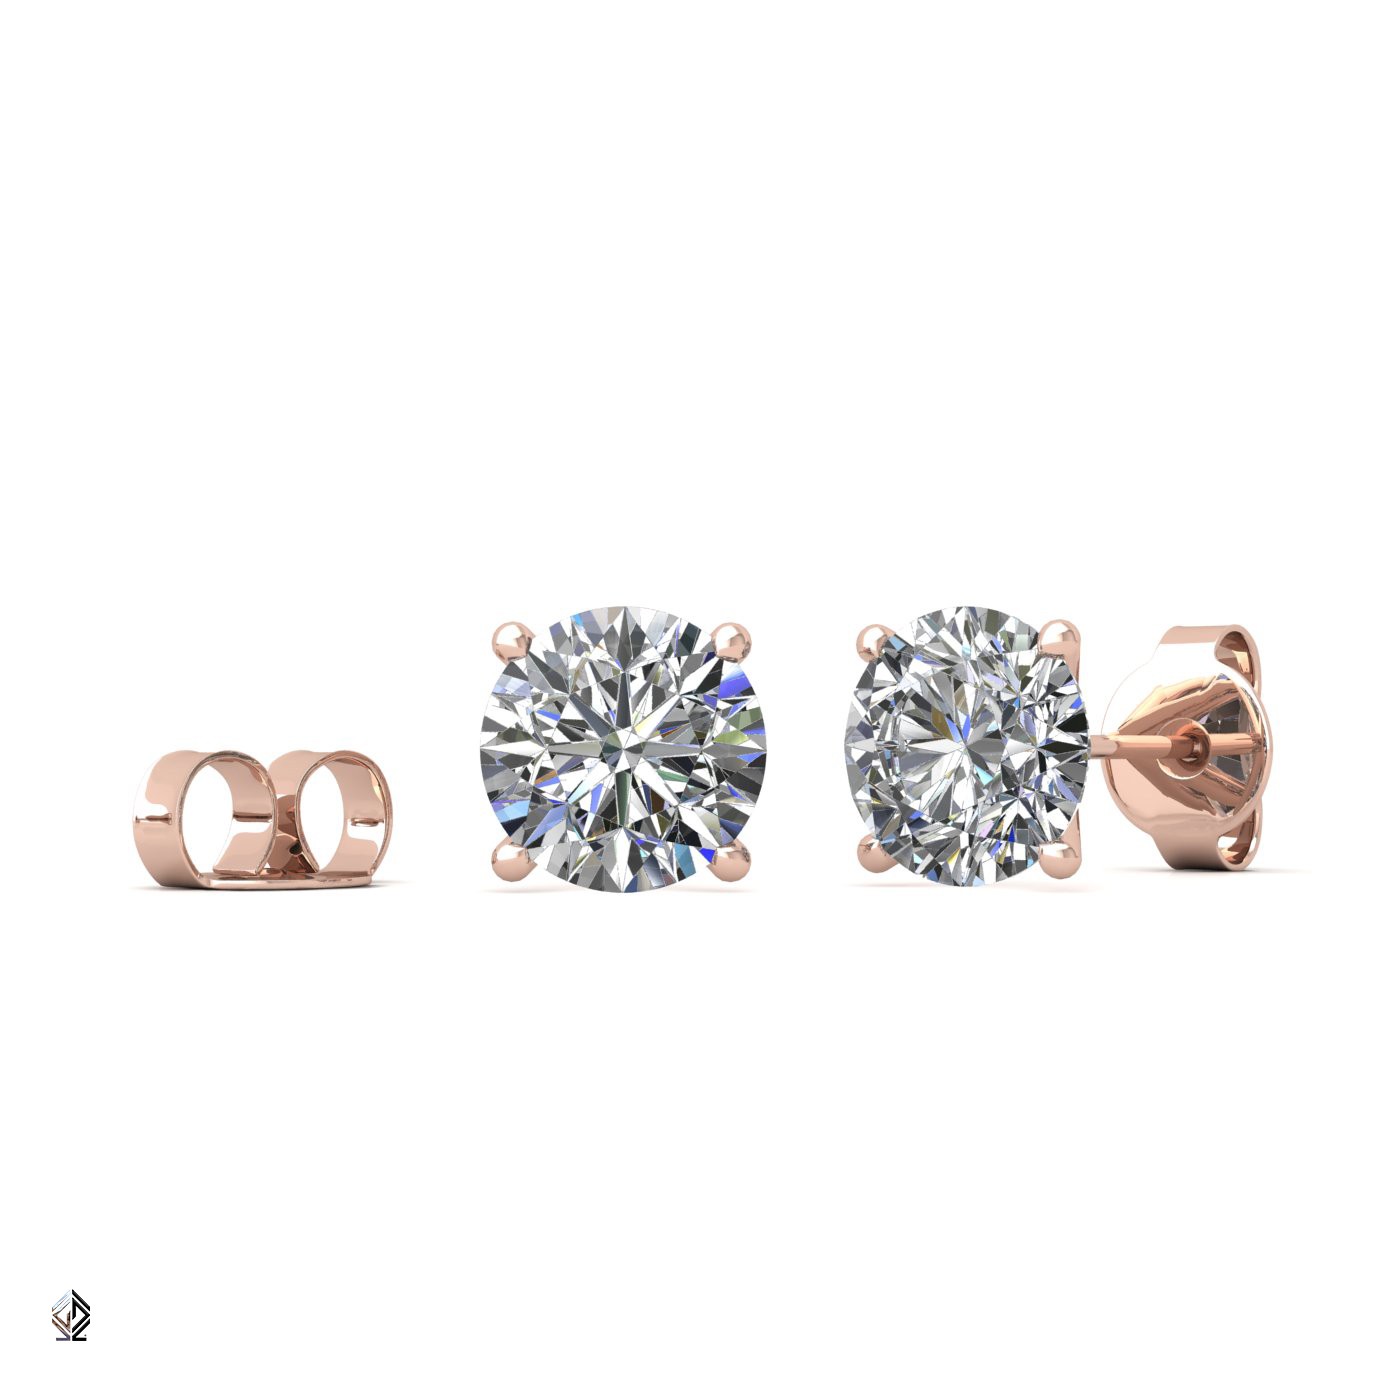 18k rose gold 1.2 ct each (2,4 tcw) 4 prongs round cut classic diamond earring studs Photos & images